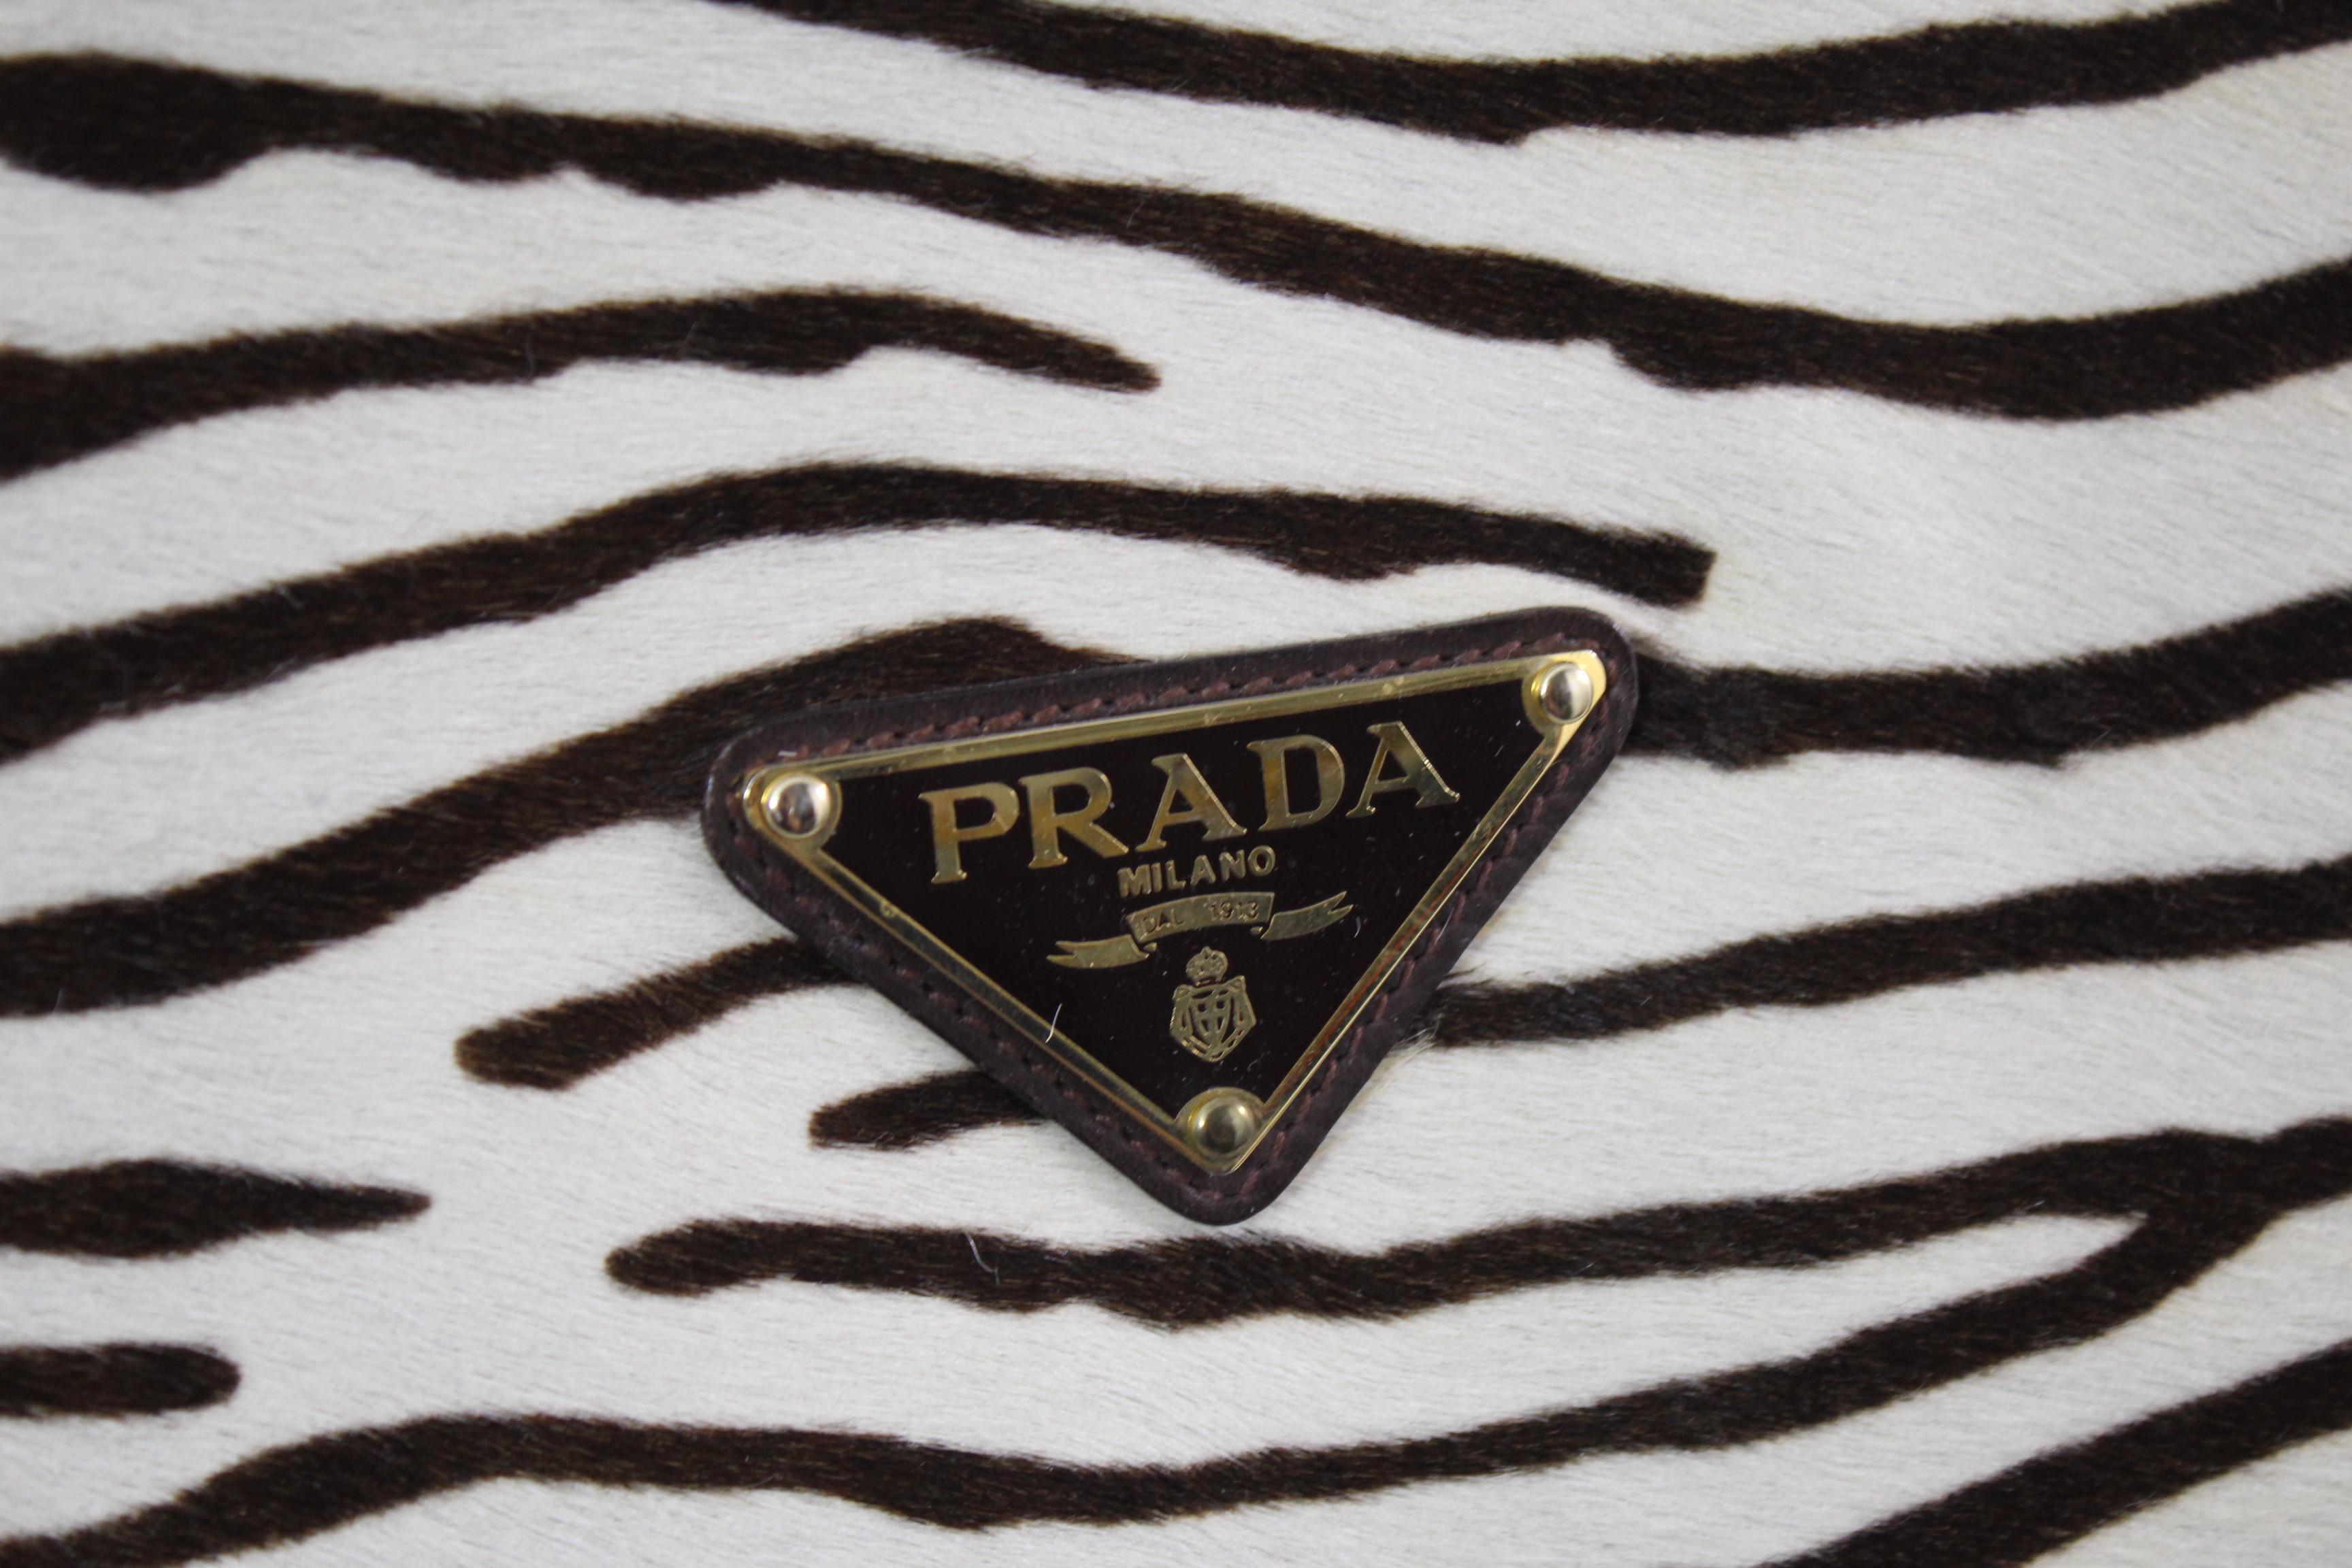 Super original Prada Zebra Style backpack.

Made in calfskin poney style leather

Good condition some signs of use but nothing remakeable.

Size height 15 inches/ 38 cm

